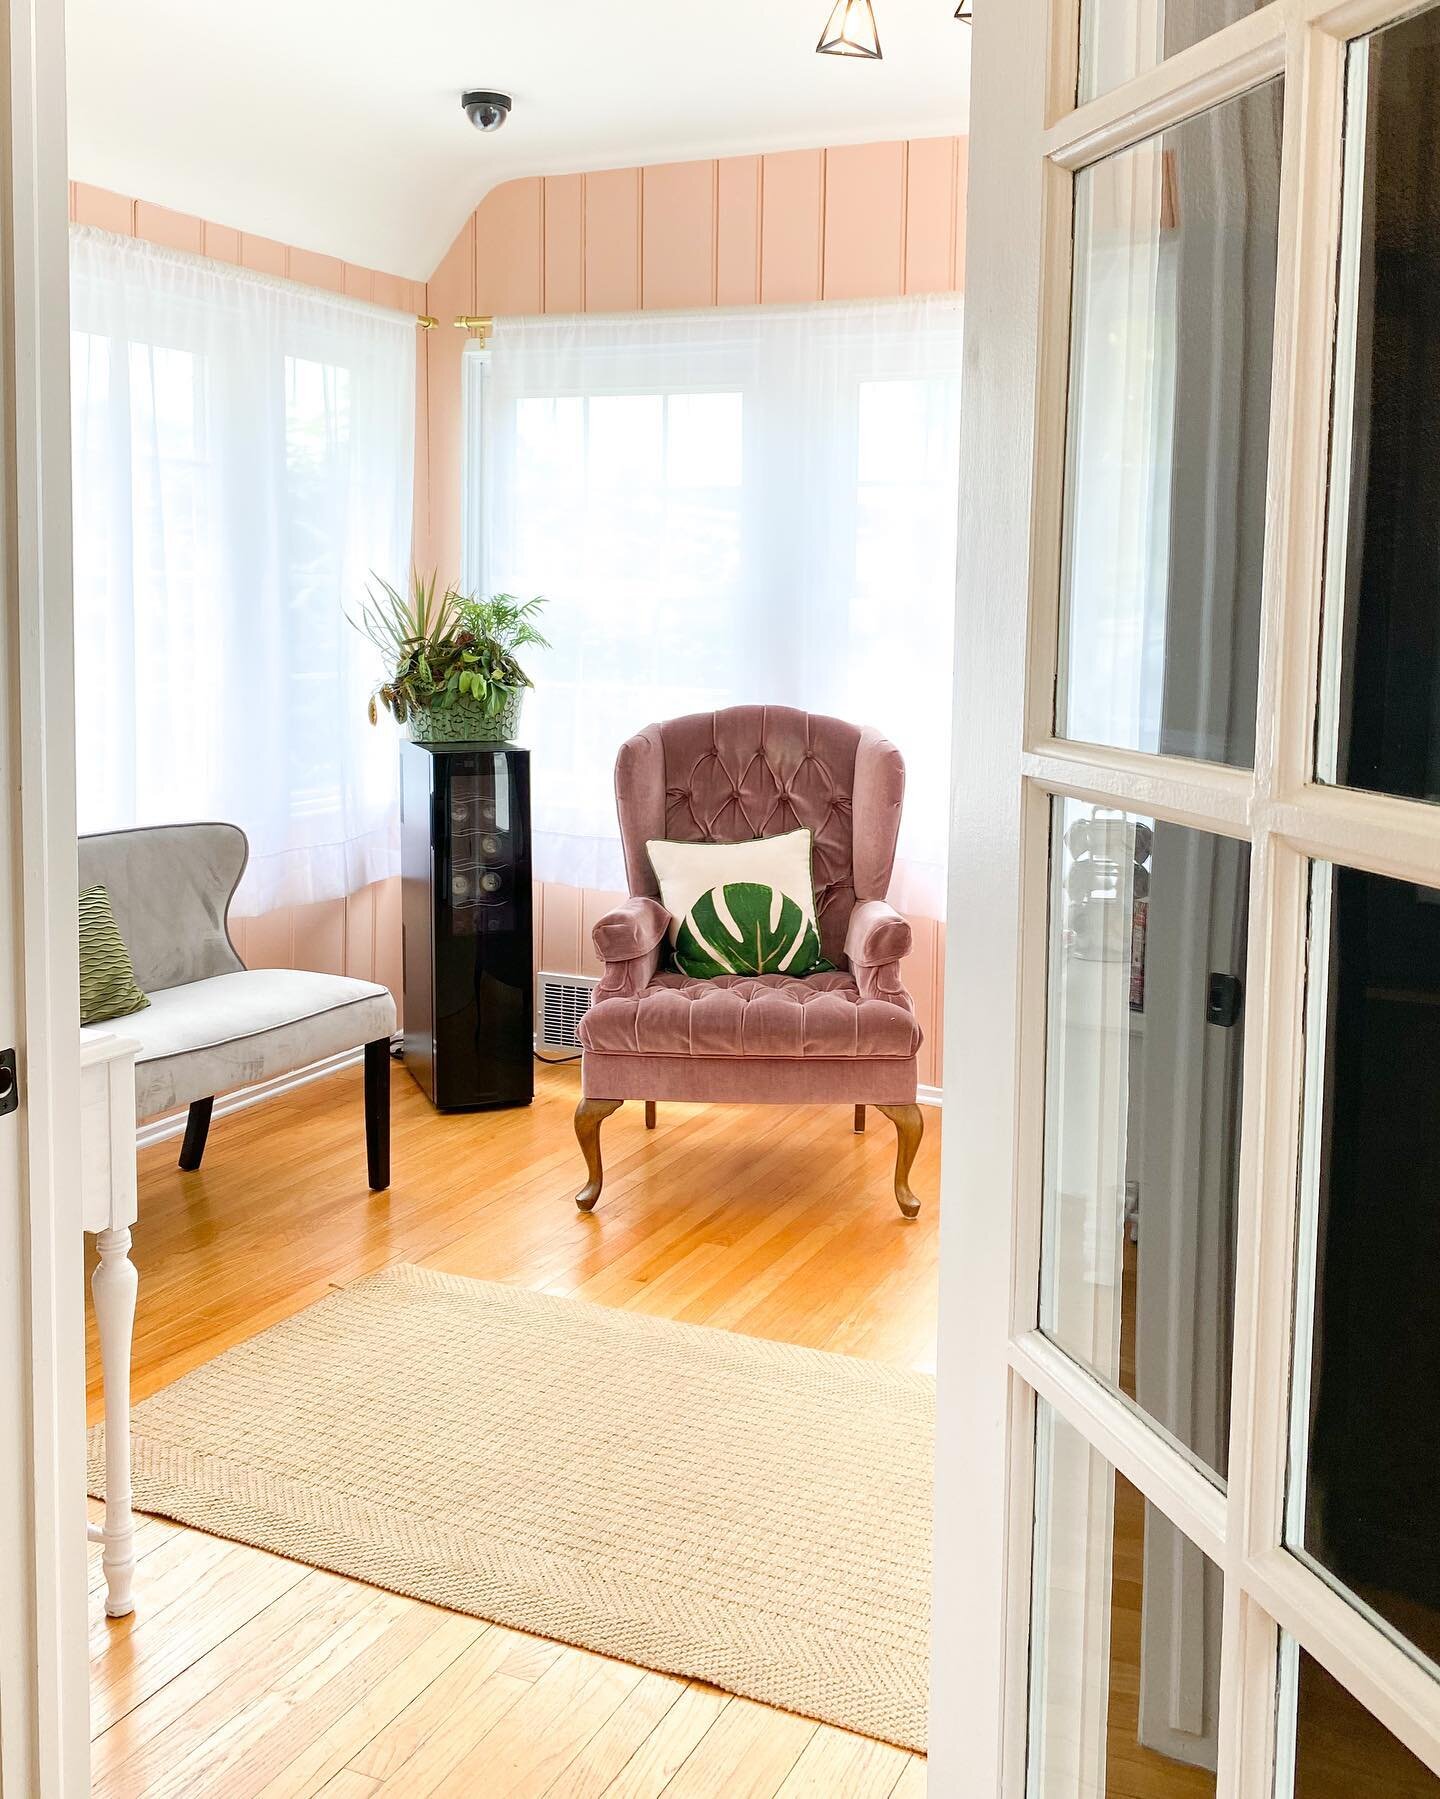 Can&rsquo;t wait to see you waiting in this cozy spot!💗🌸

Now that the weather is getting warmer (hopefully 🤞🤞) It&rsquo;s time to get your skin glowing, body relaxed and your nails polished! 

We have openings this week!! Hurry&hellip; they go q